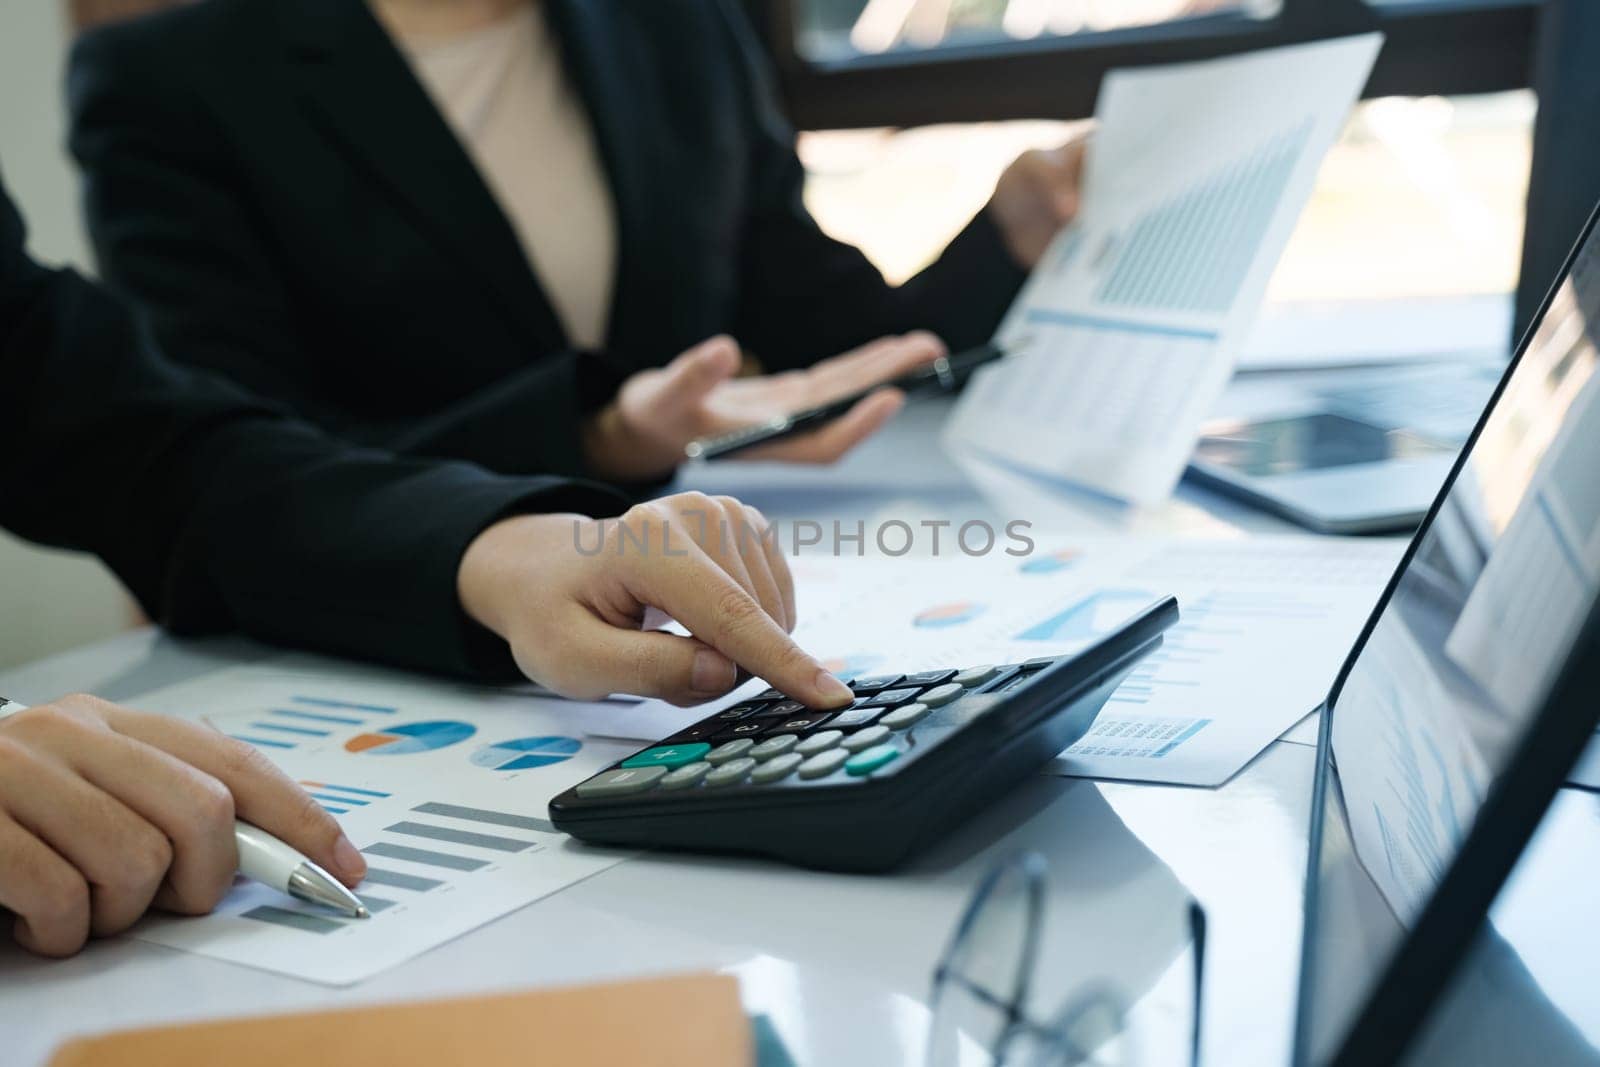 Two women are working on a spreadsheet, one of them pointing at a calculator. Scene is focused and professional